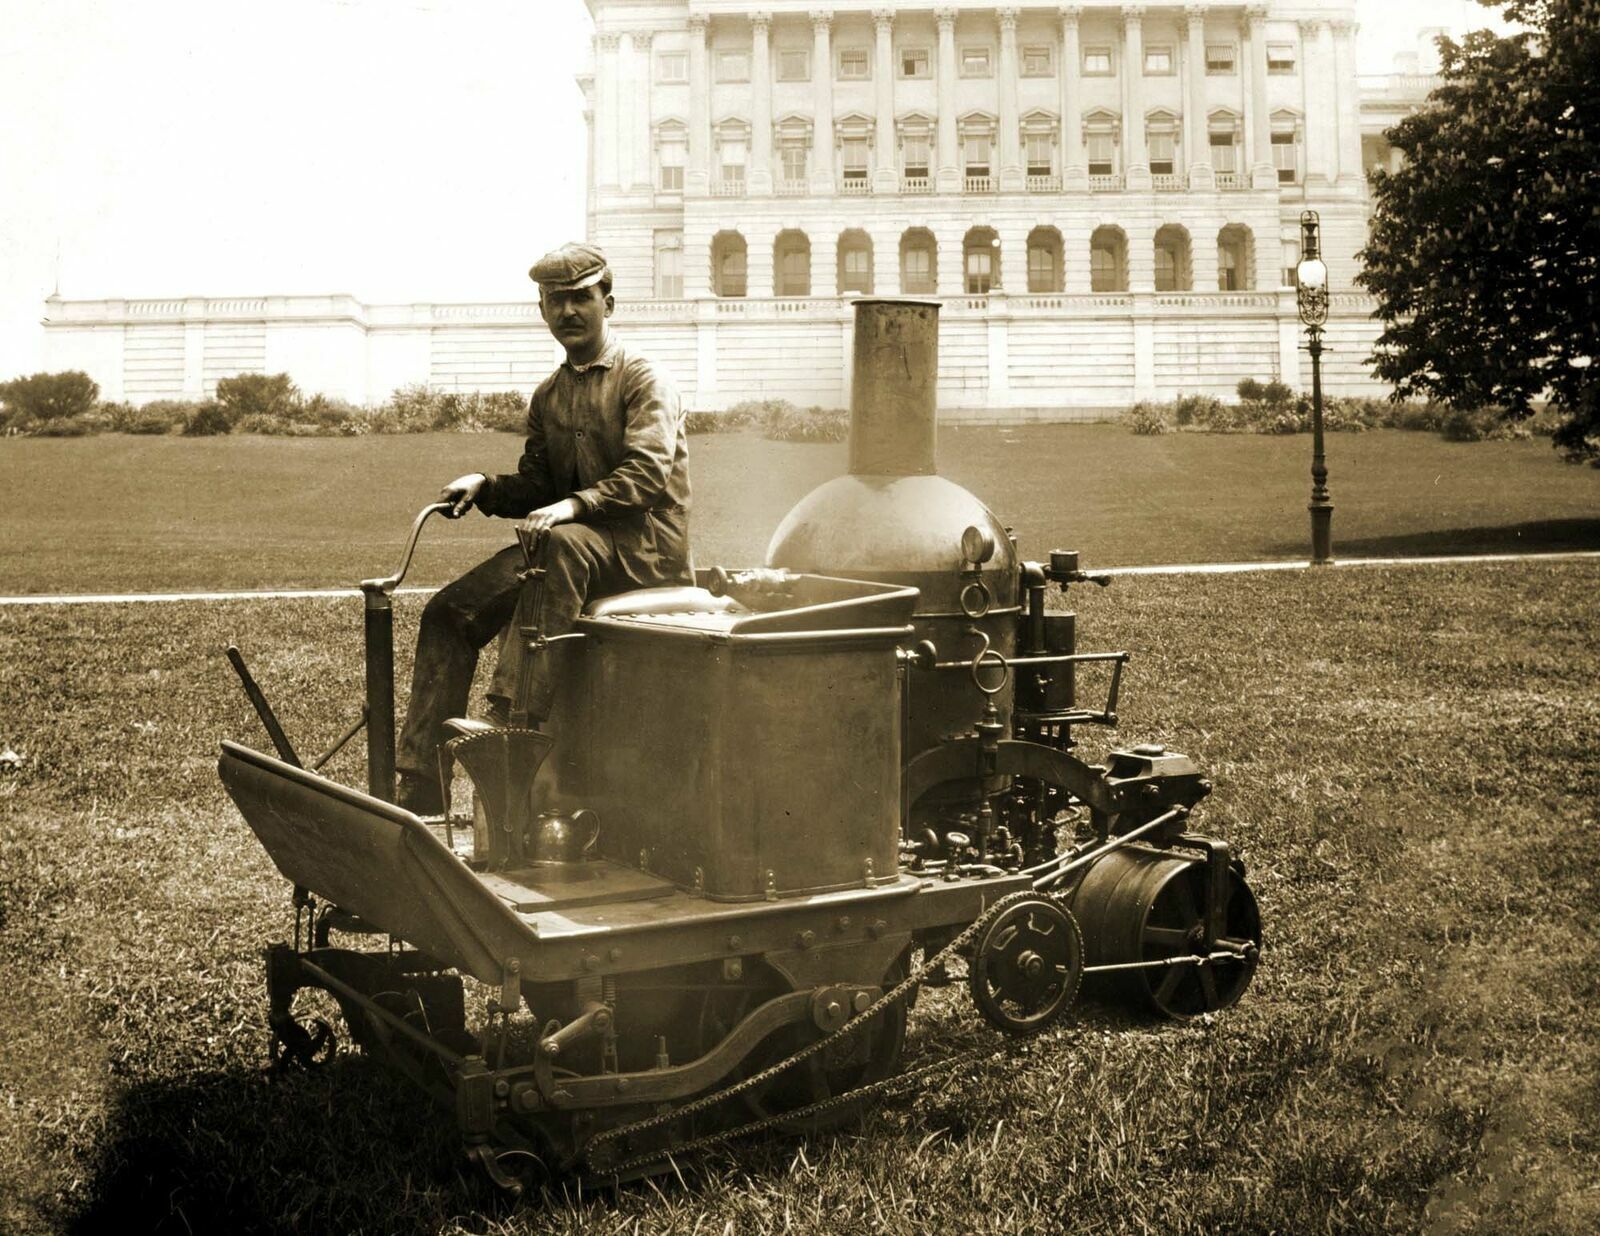 1903 Steam Powered Lawn Mower U.S. Capitol DC Old Photo 8.5